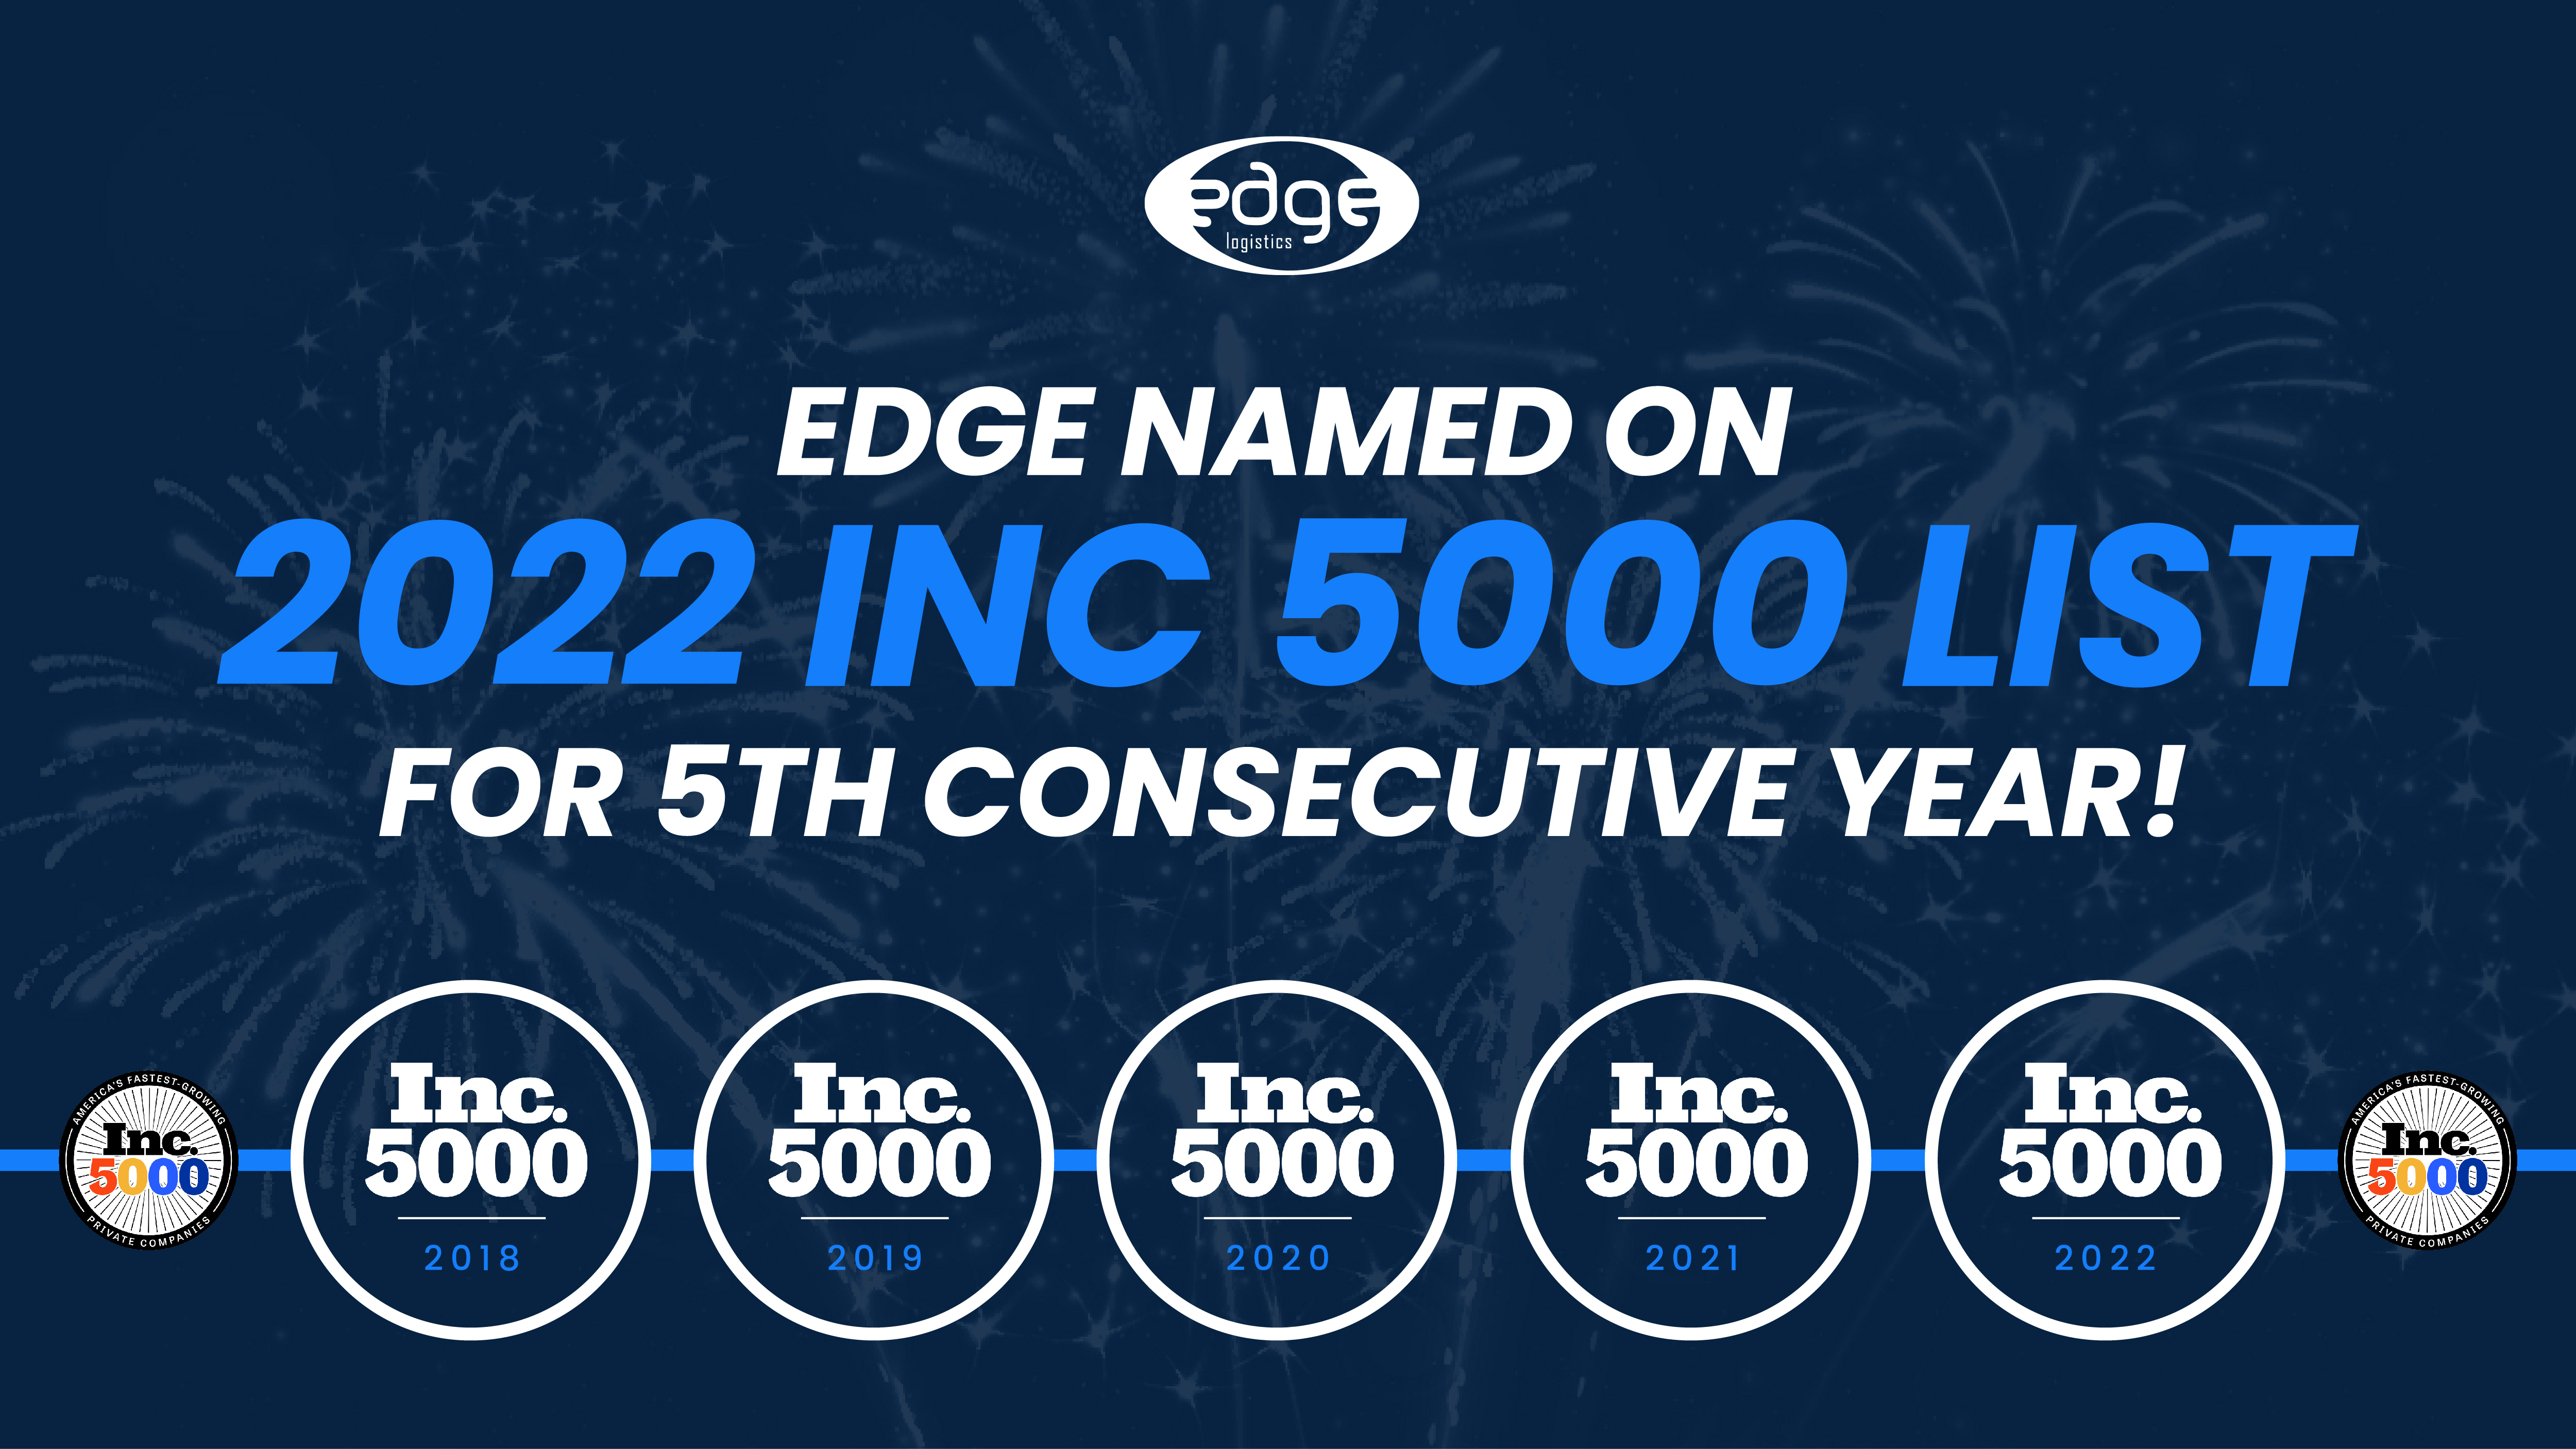 Edge Logistics Named Among INC 5000 List for 5th Consecutive Year!